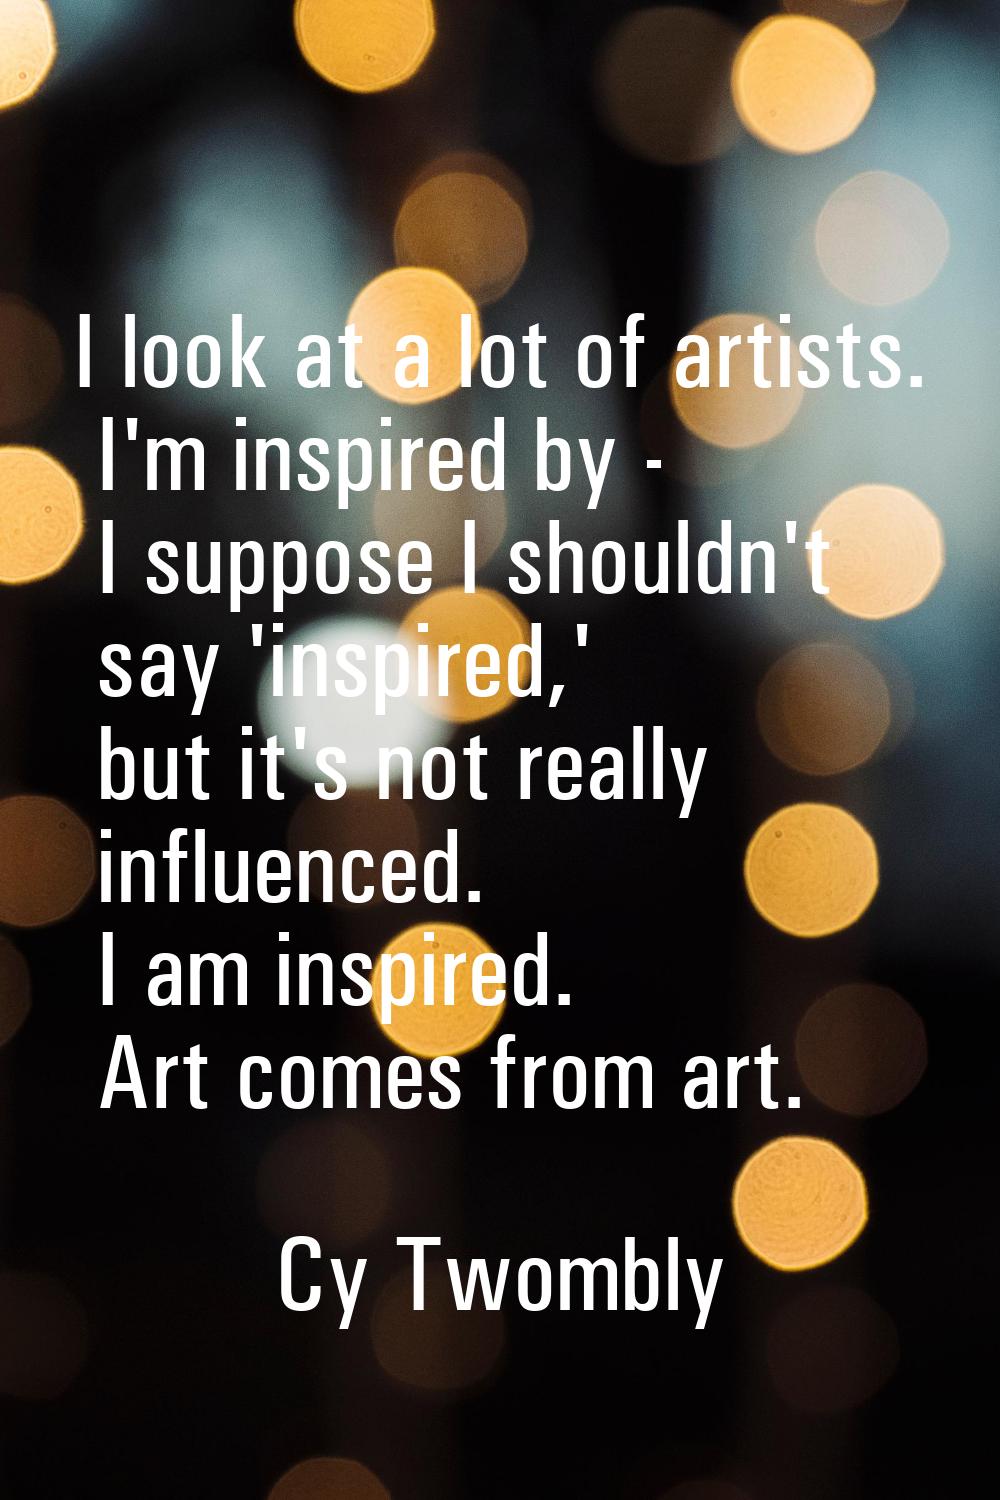 I look at a lot of artists. I'm inspired by - I suppose I shouldn't say 'inspired,' but it's not re